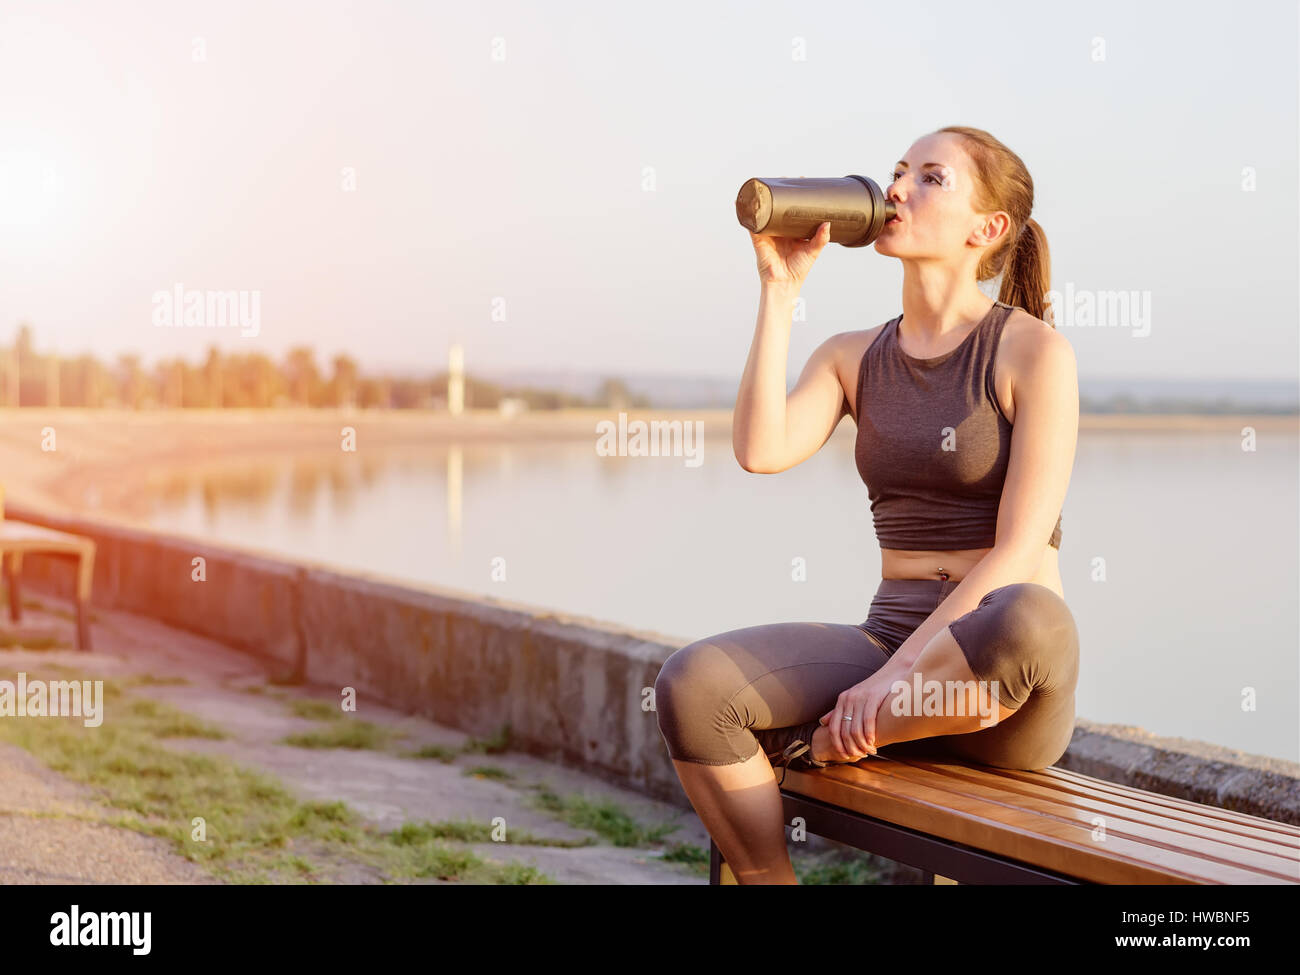 young girl of Caucasian appearance drinks a protein cocktail from a shaker after jogging in the open air. The bright sun illuminates it. Stock Photo